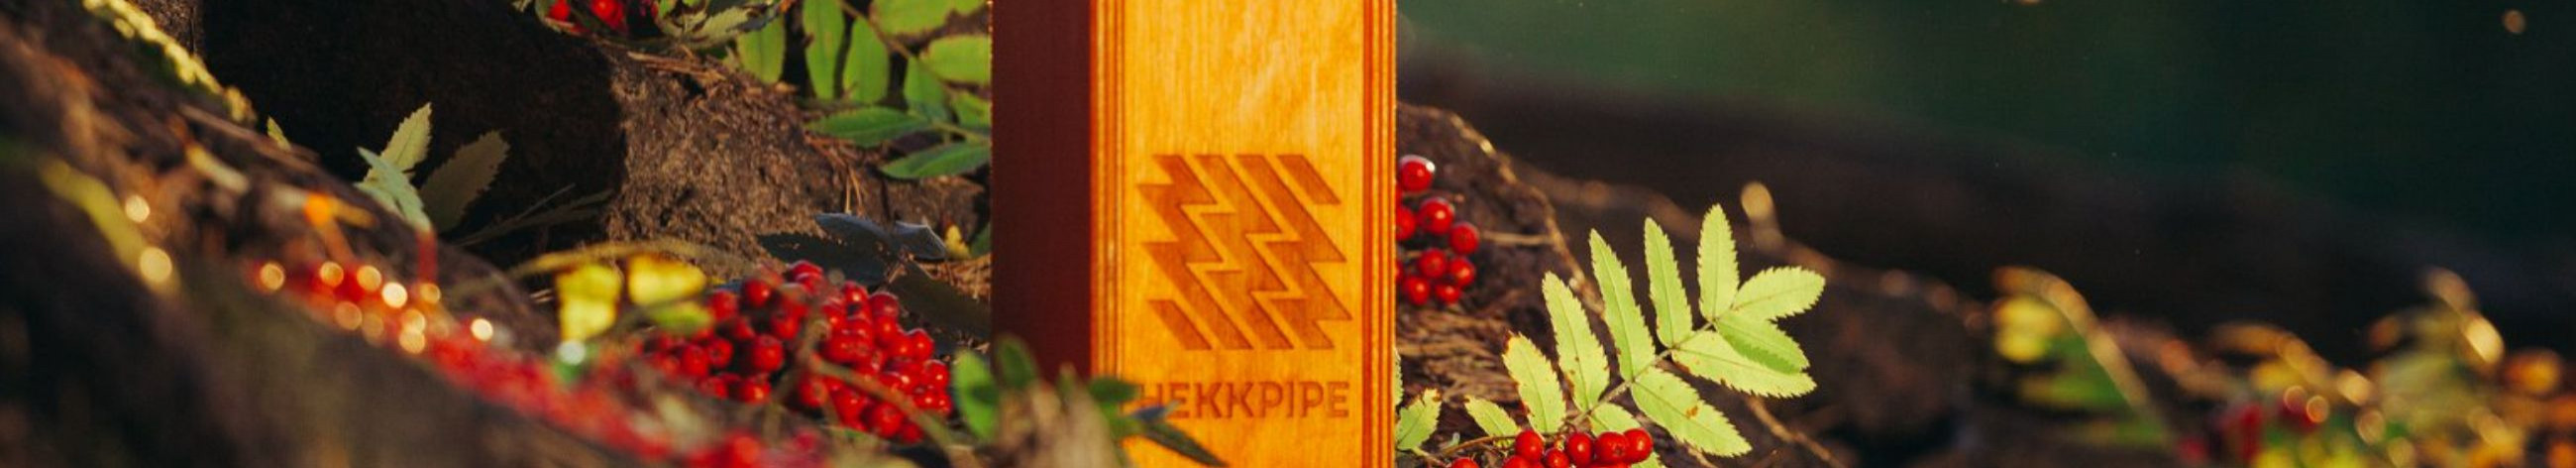 Hookah Hekkpipe is the best brand in custom shisha and portable hookah categories. Choose own design by adding picture, logo and text on wooden box.